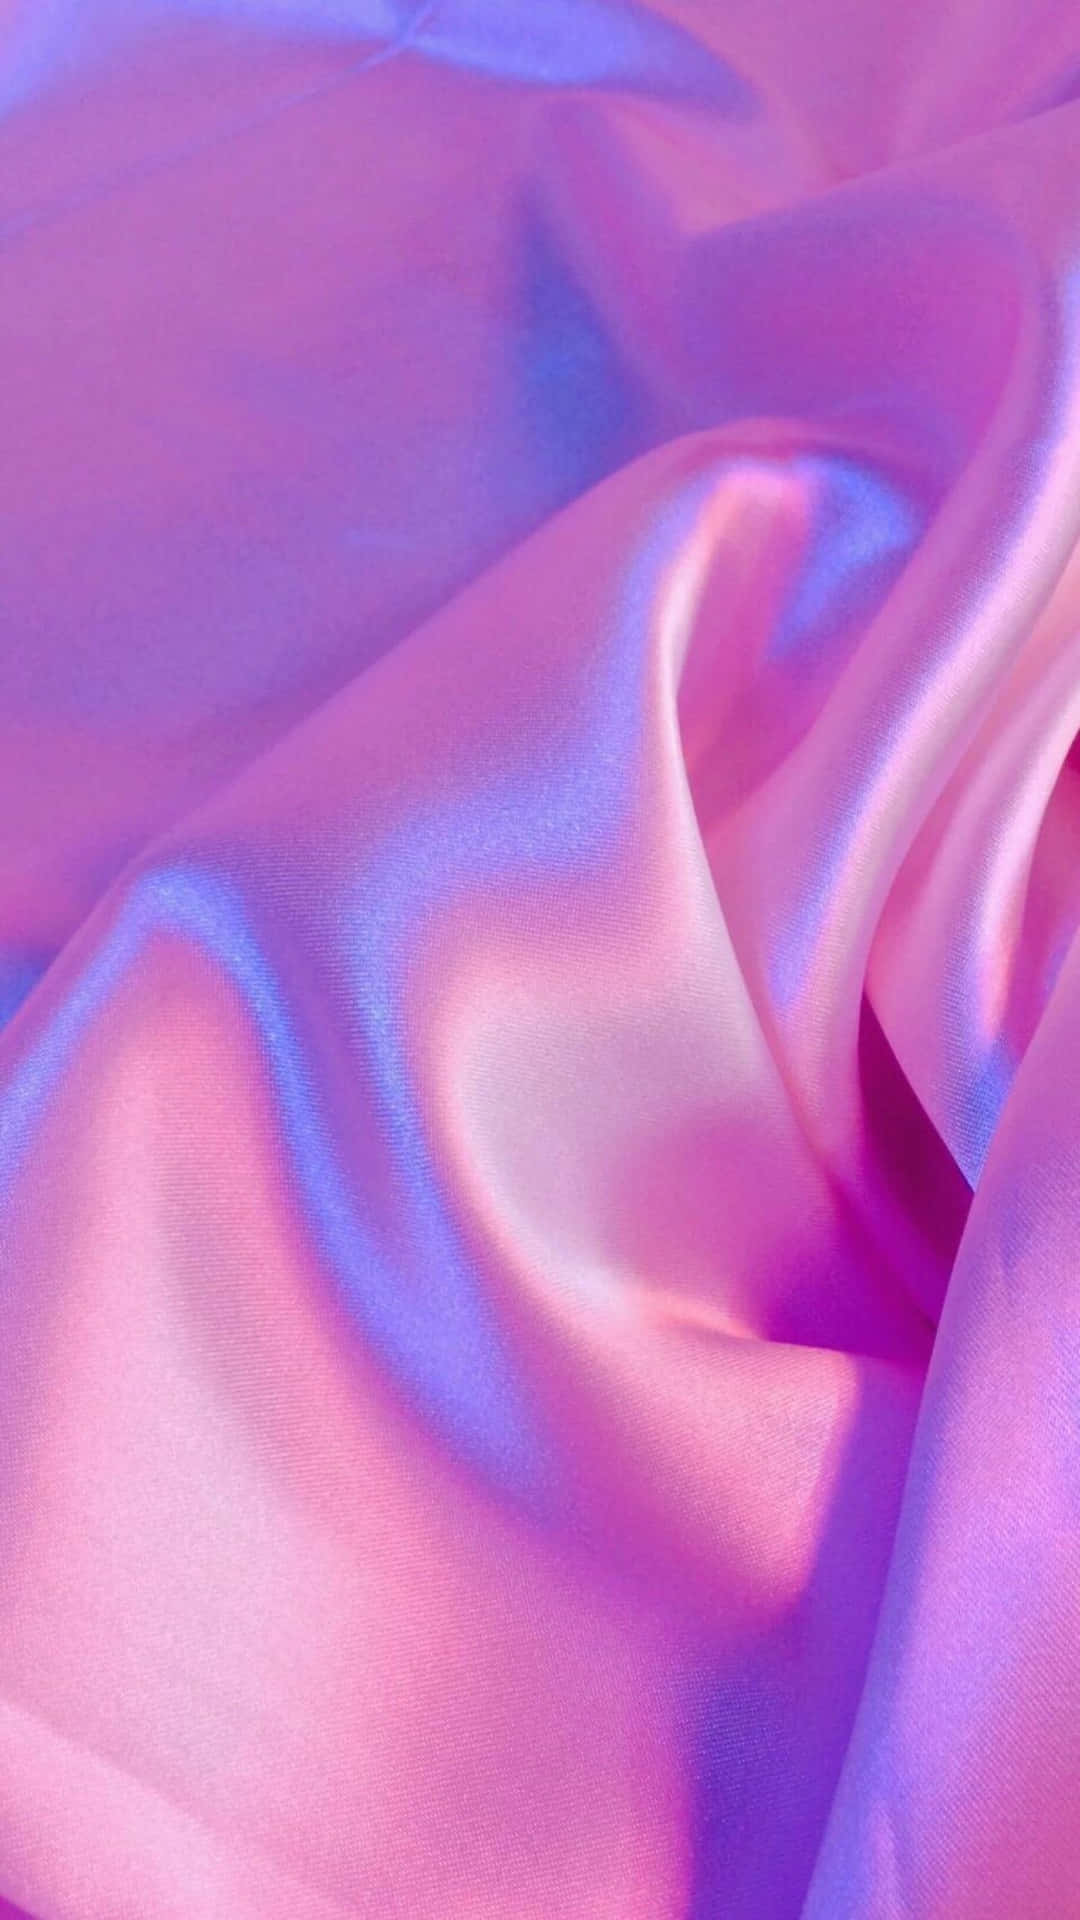 A Close Up Of A Pink And Blue Satin Fabric Wallpaper